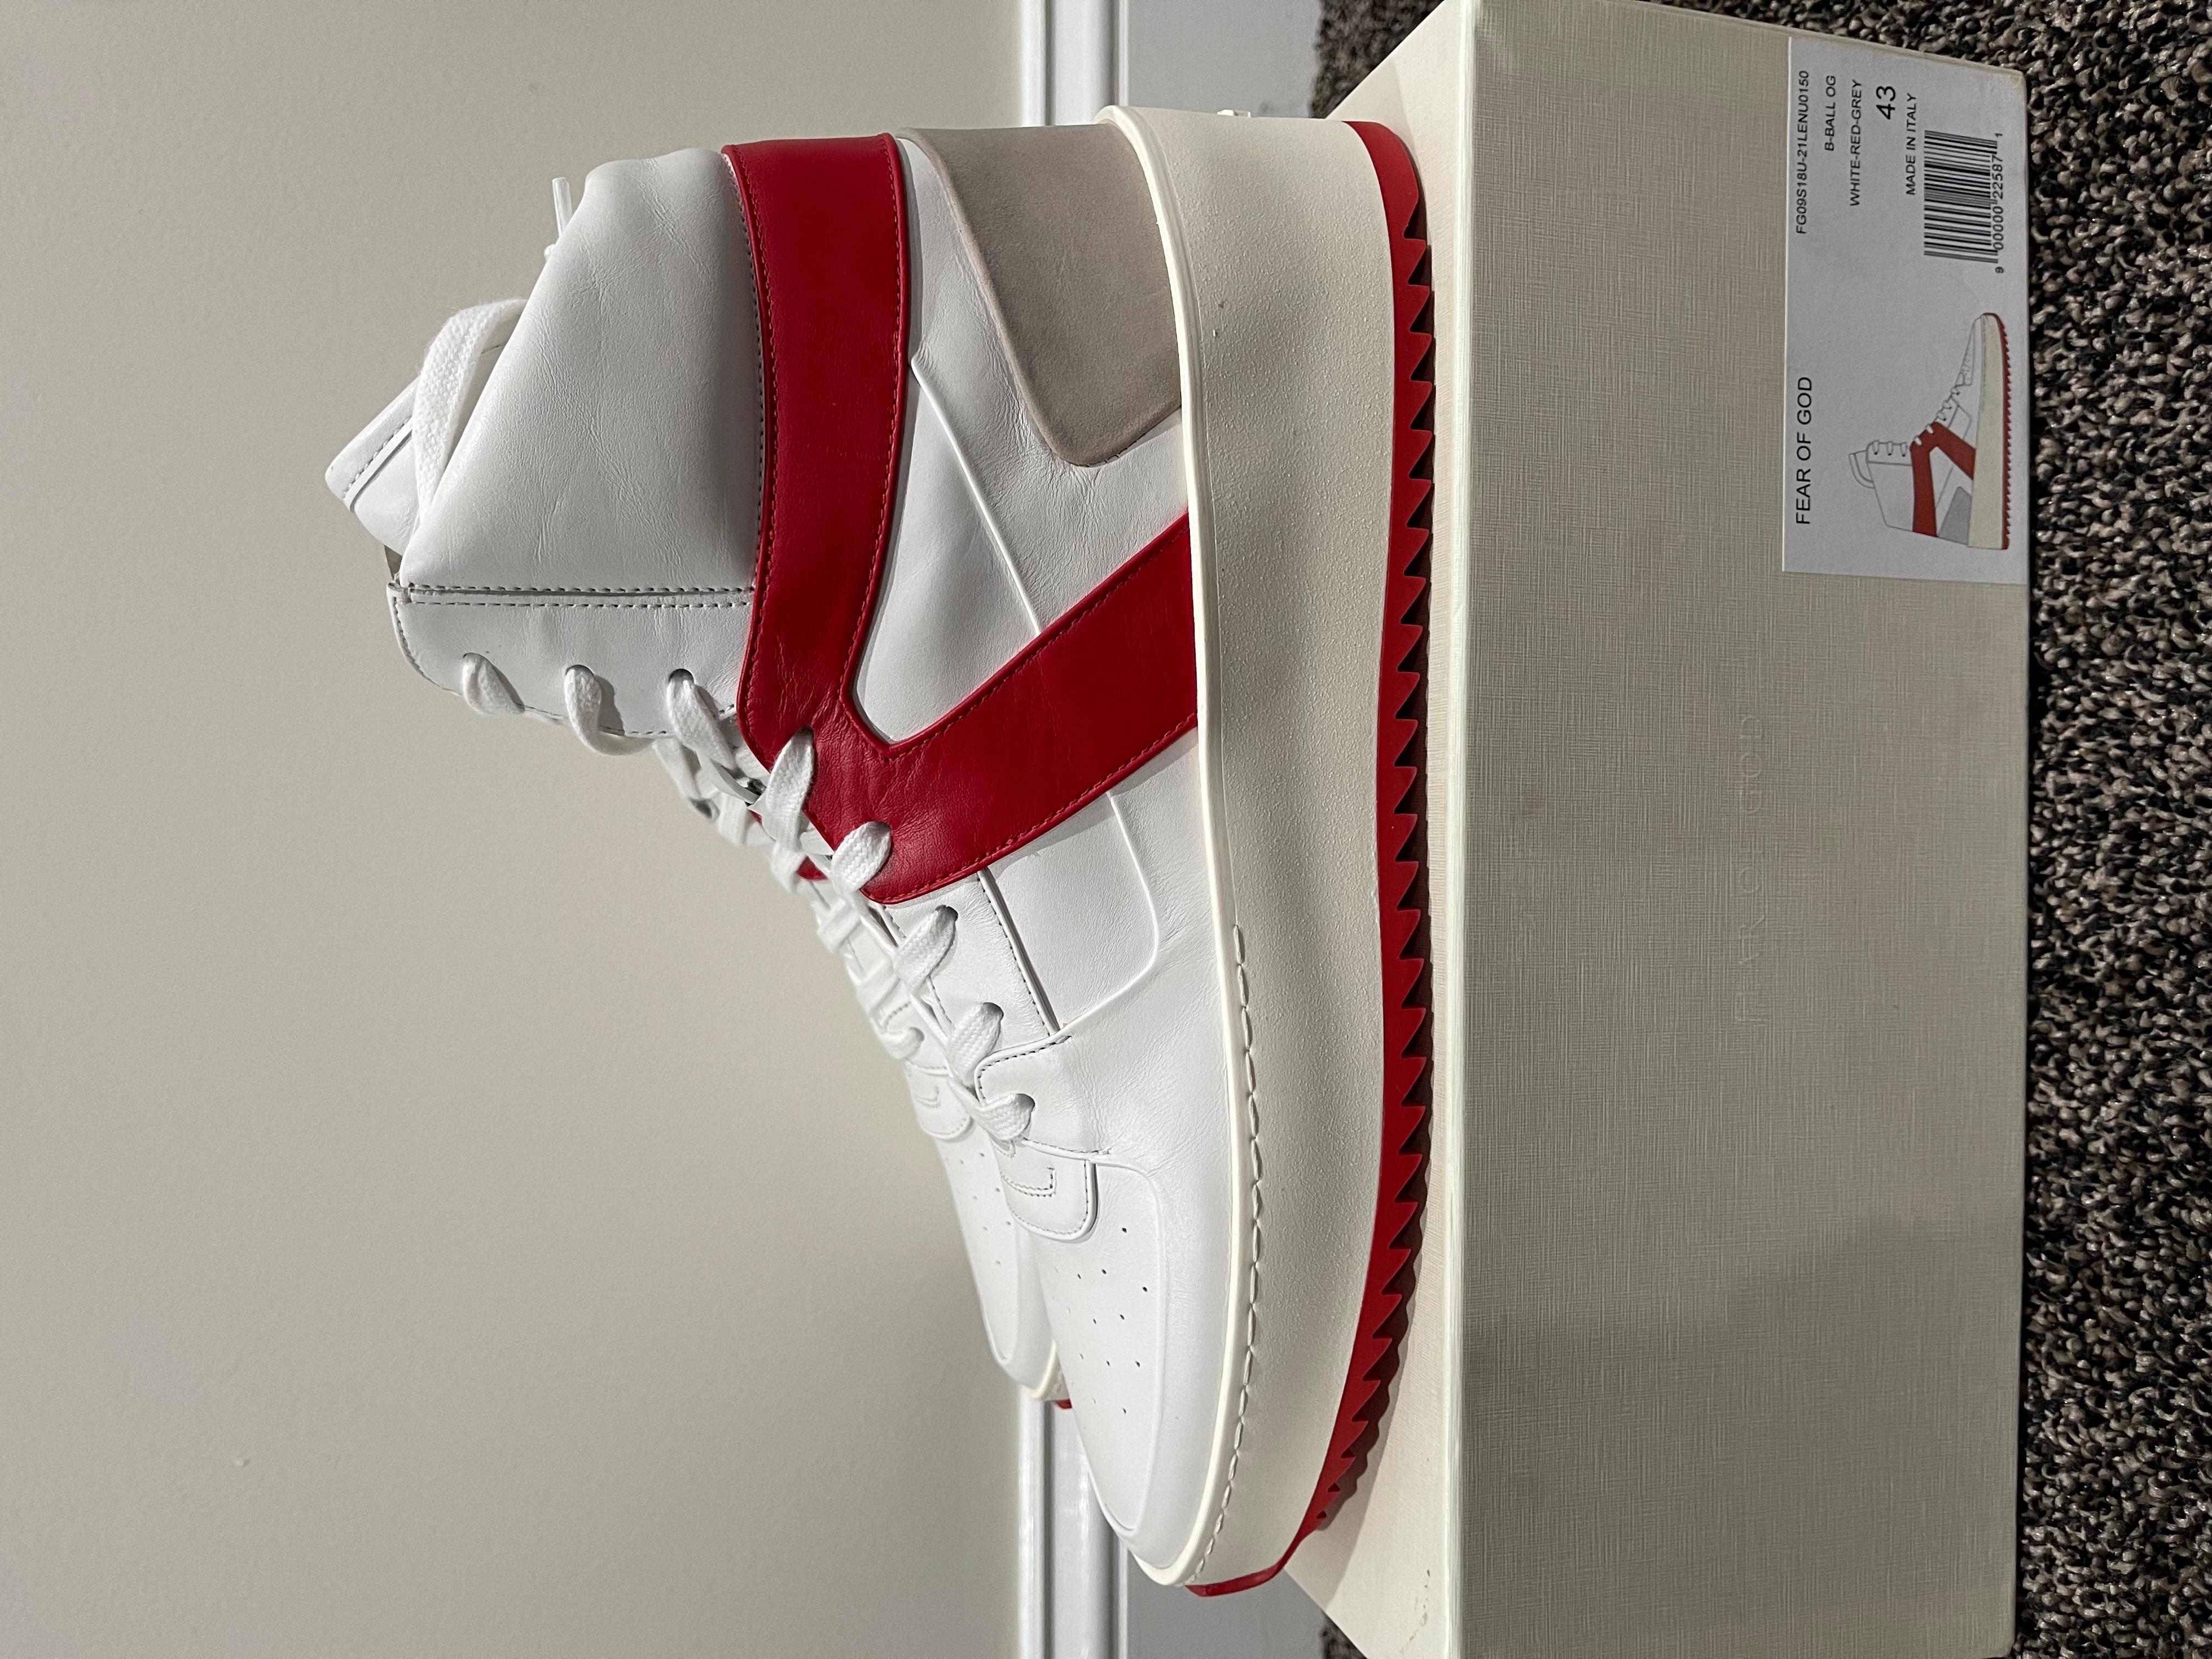 Fear of God Leather Basketball Sneakers Red White His
Size 43
Brand new w/ og all
Retails at $1195

Only pair on market with this colorway

all sales are final